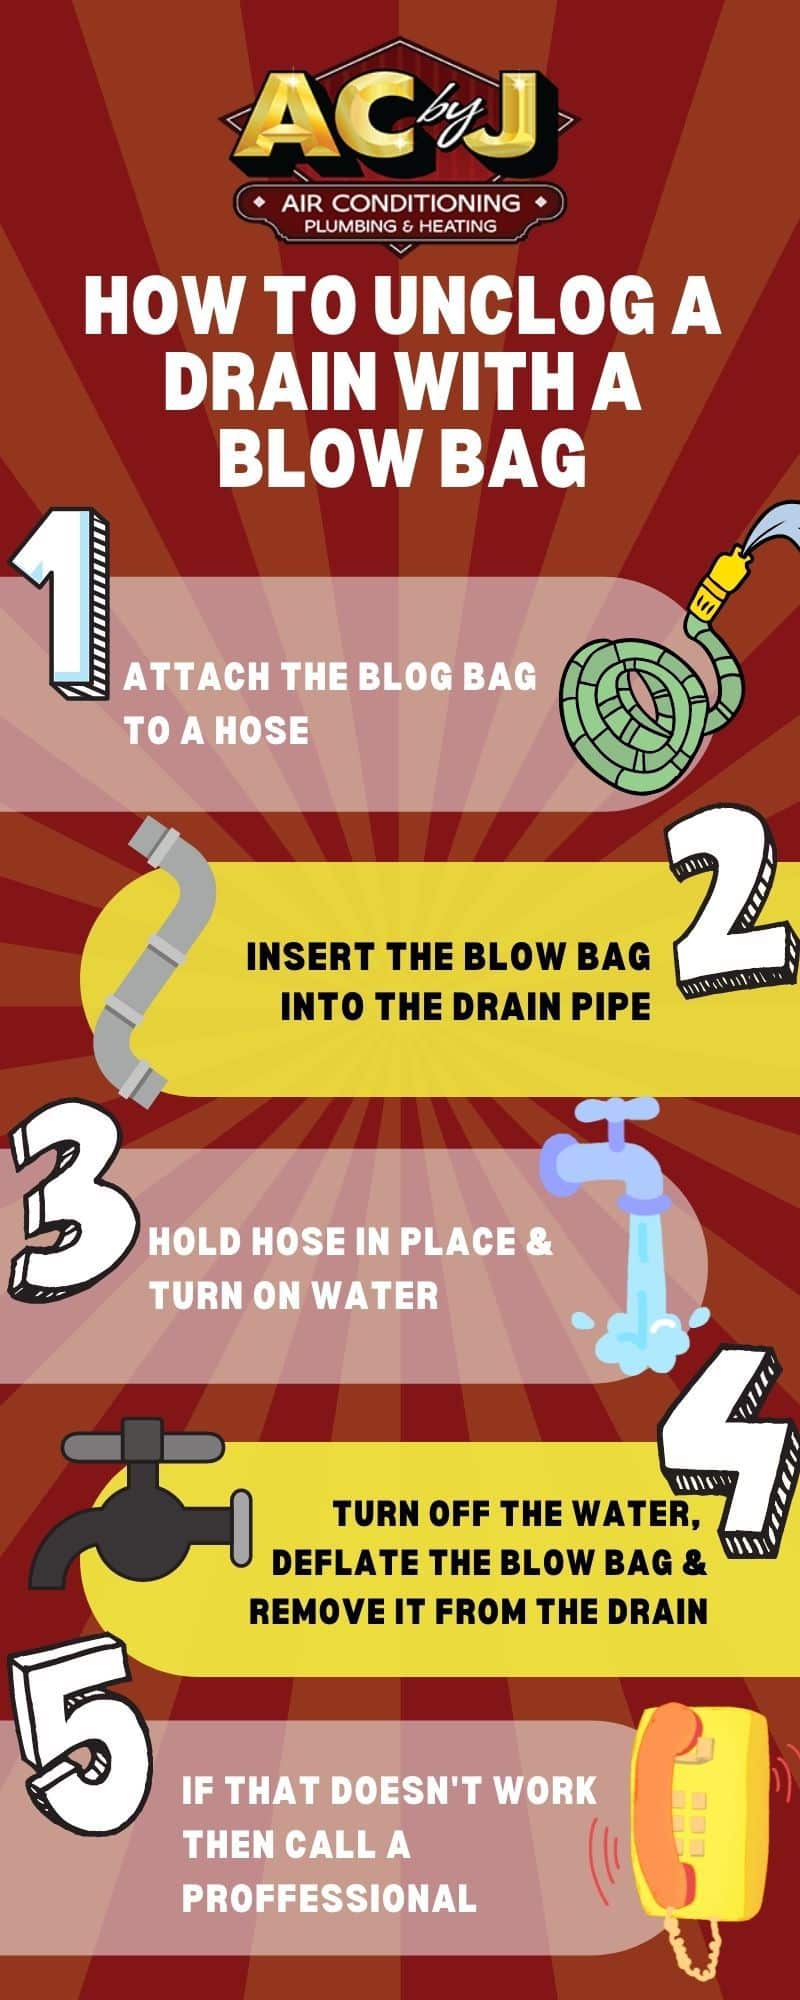 How To Unclog a Drain with a Blog Bag